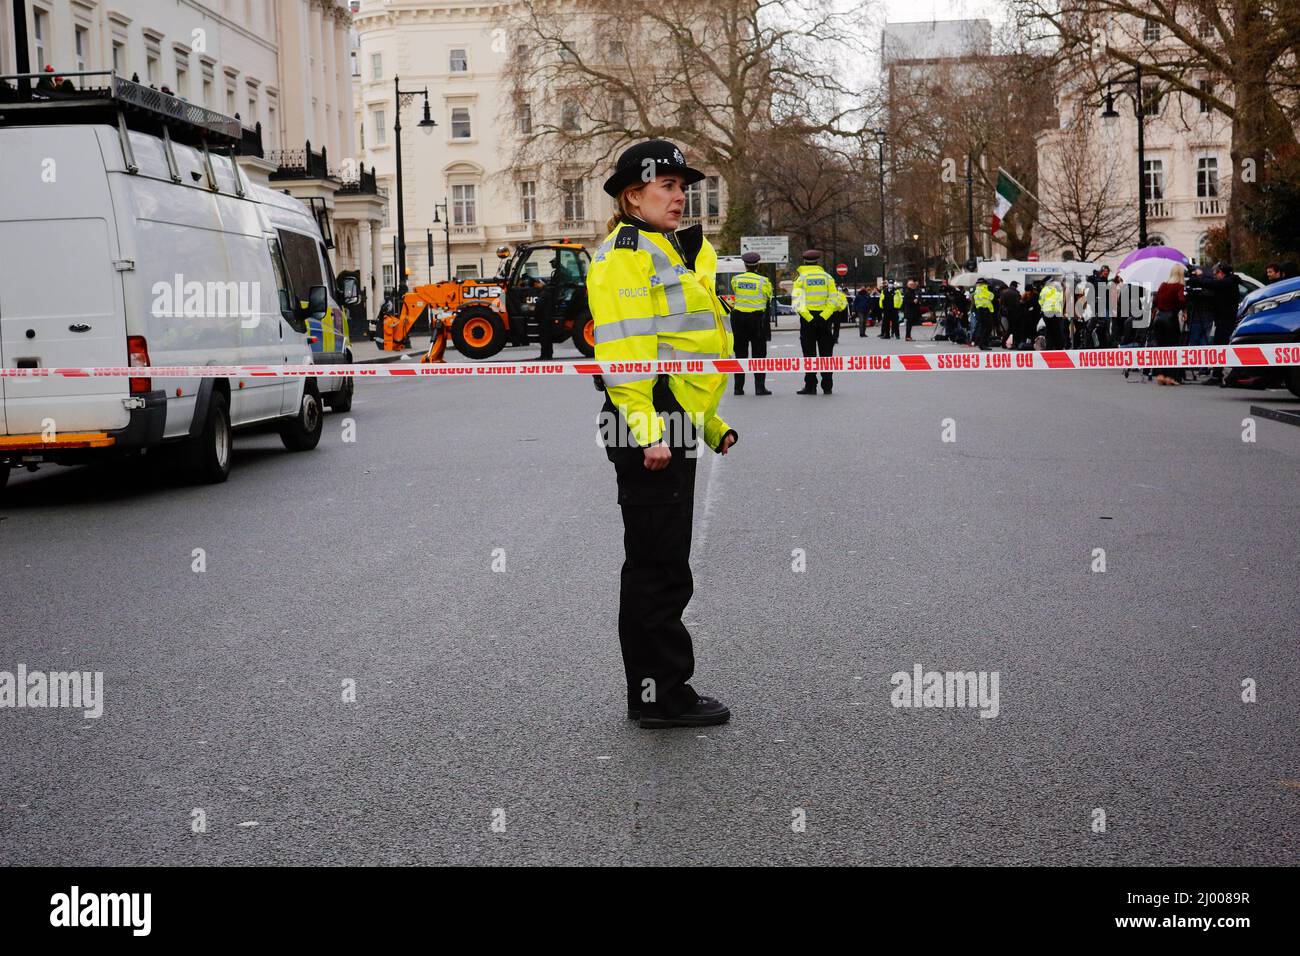 London (UK), 14.03.2022: Squatters occupy the house of Russian oligarch Oleg Deripaska in Belgrave Square in the capital. Police move in on the occupi Stock Photo